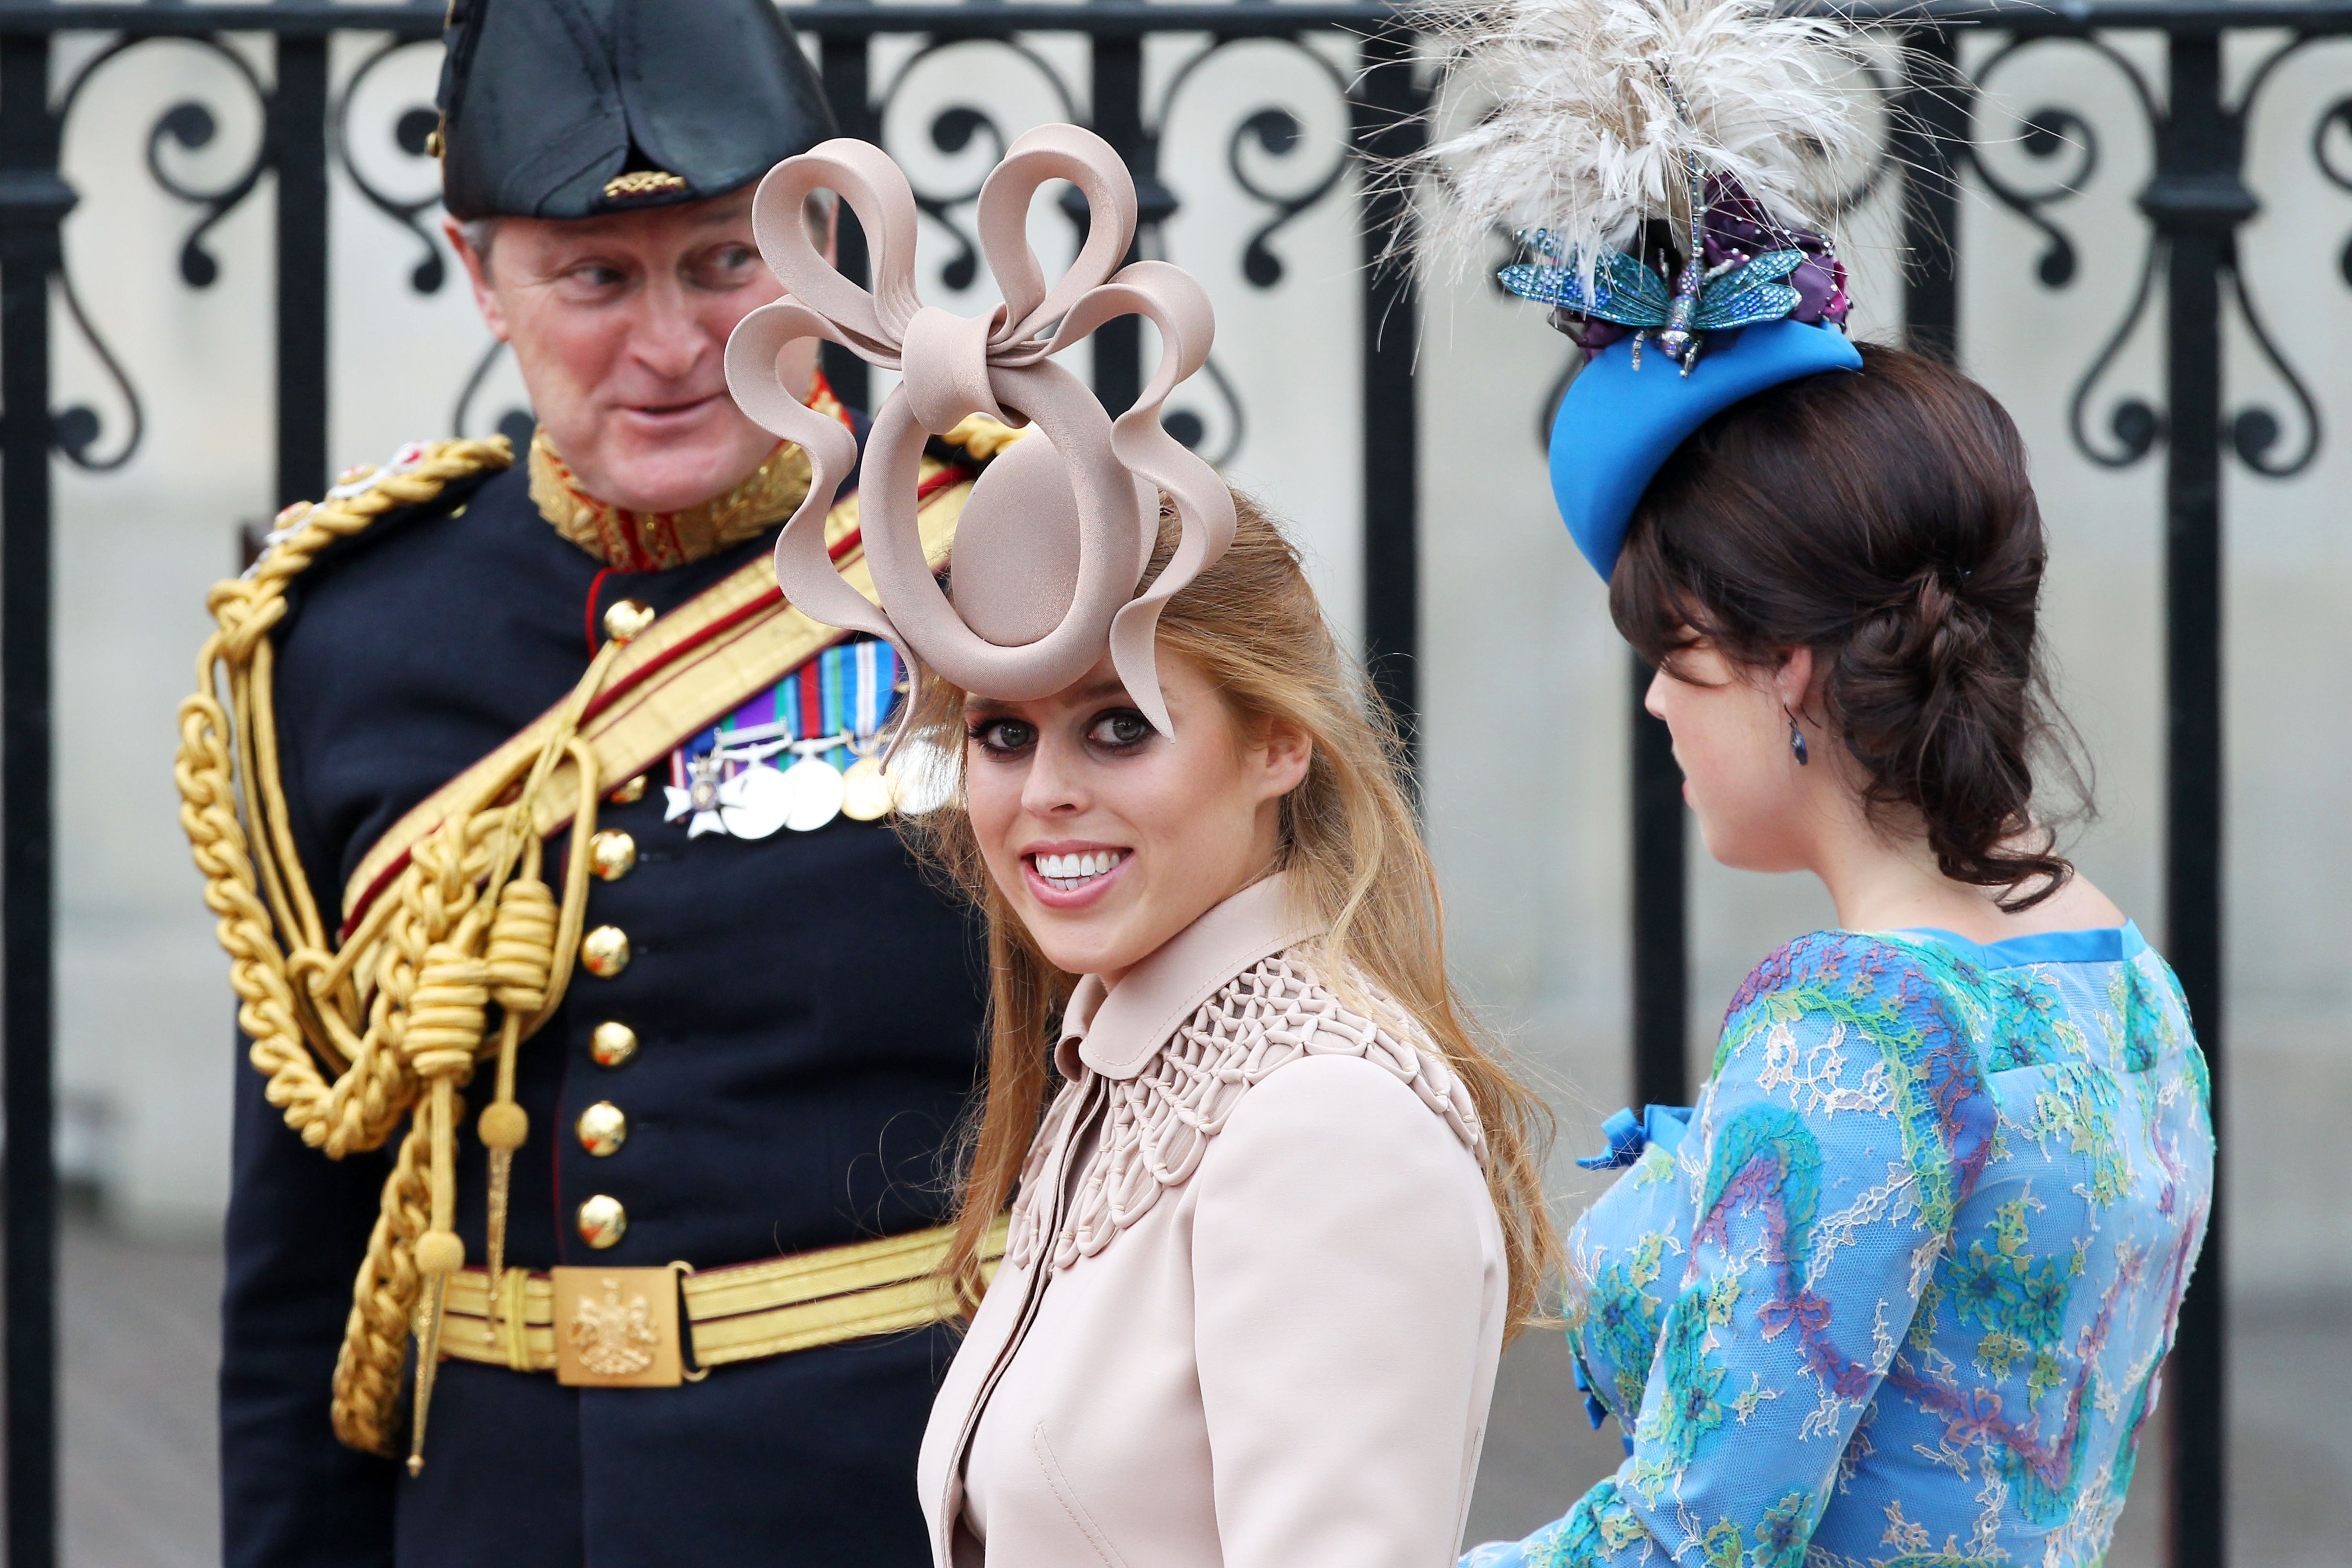 Princess Beatrice of York (L) with her sister Princess Eugenie of York arrive at the Royal Wedding of Prince William to Kate Middleton at Westminster Abbey on April 29, 2011 in London, England. (Chris Jackson—Getty Images)